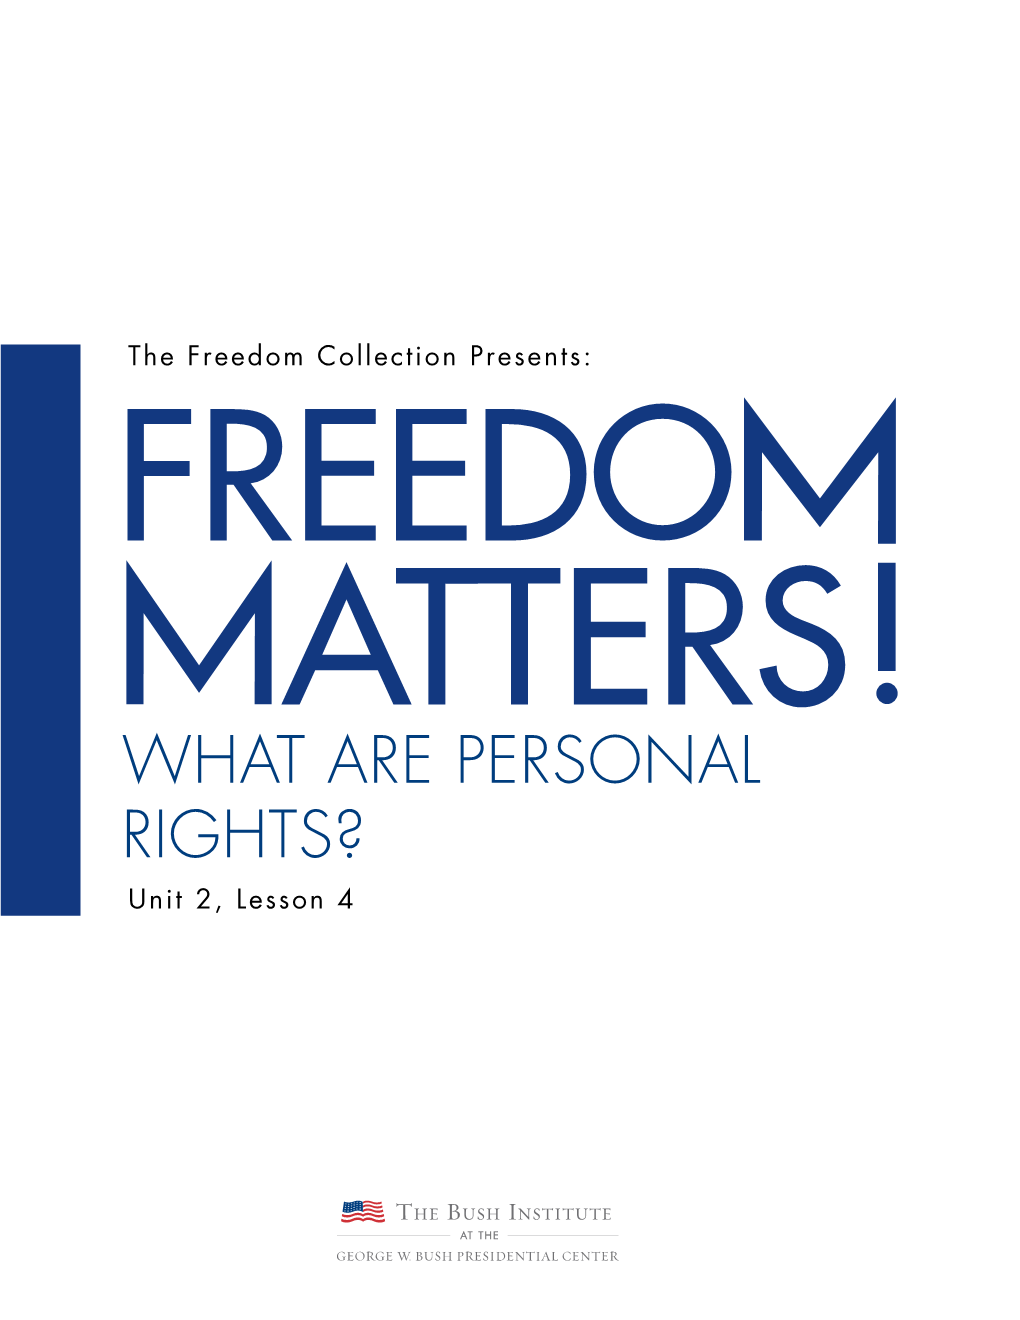 WHAT ARE PERSONAL RIGHTS? Unit 2, Lesson 4 UNIT 2, LESSON 4 WHAT ARE PERSONAL RIGHTS?